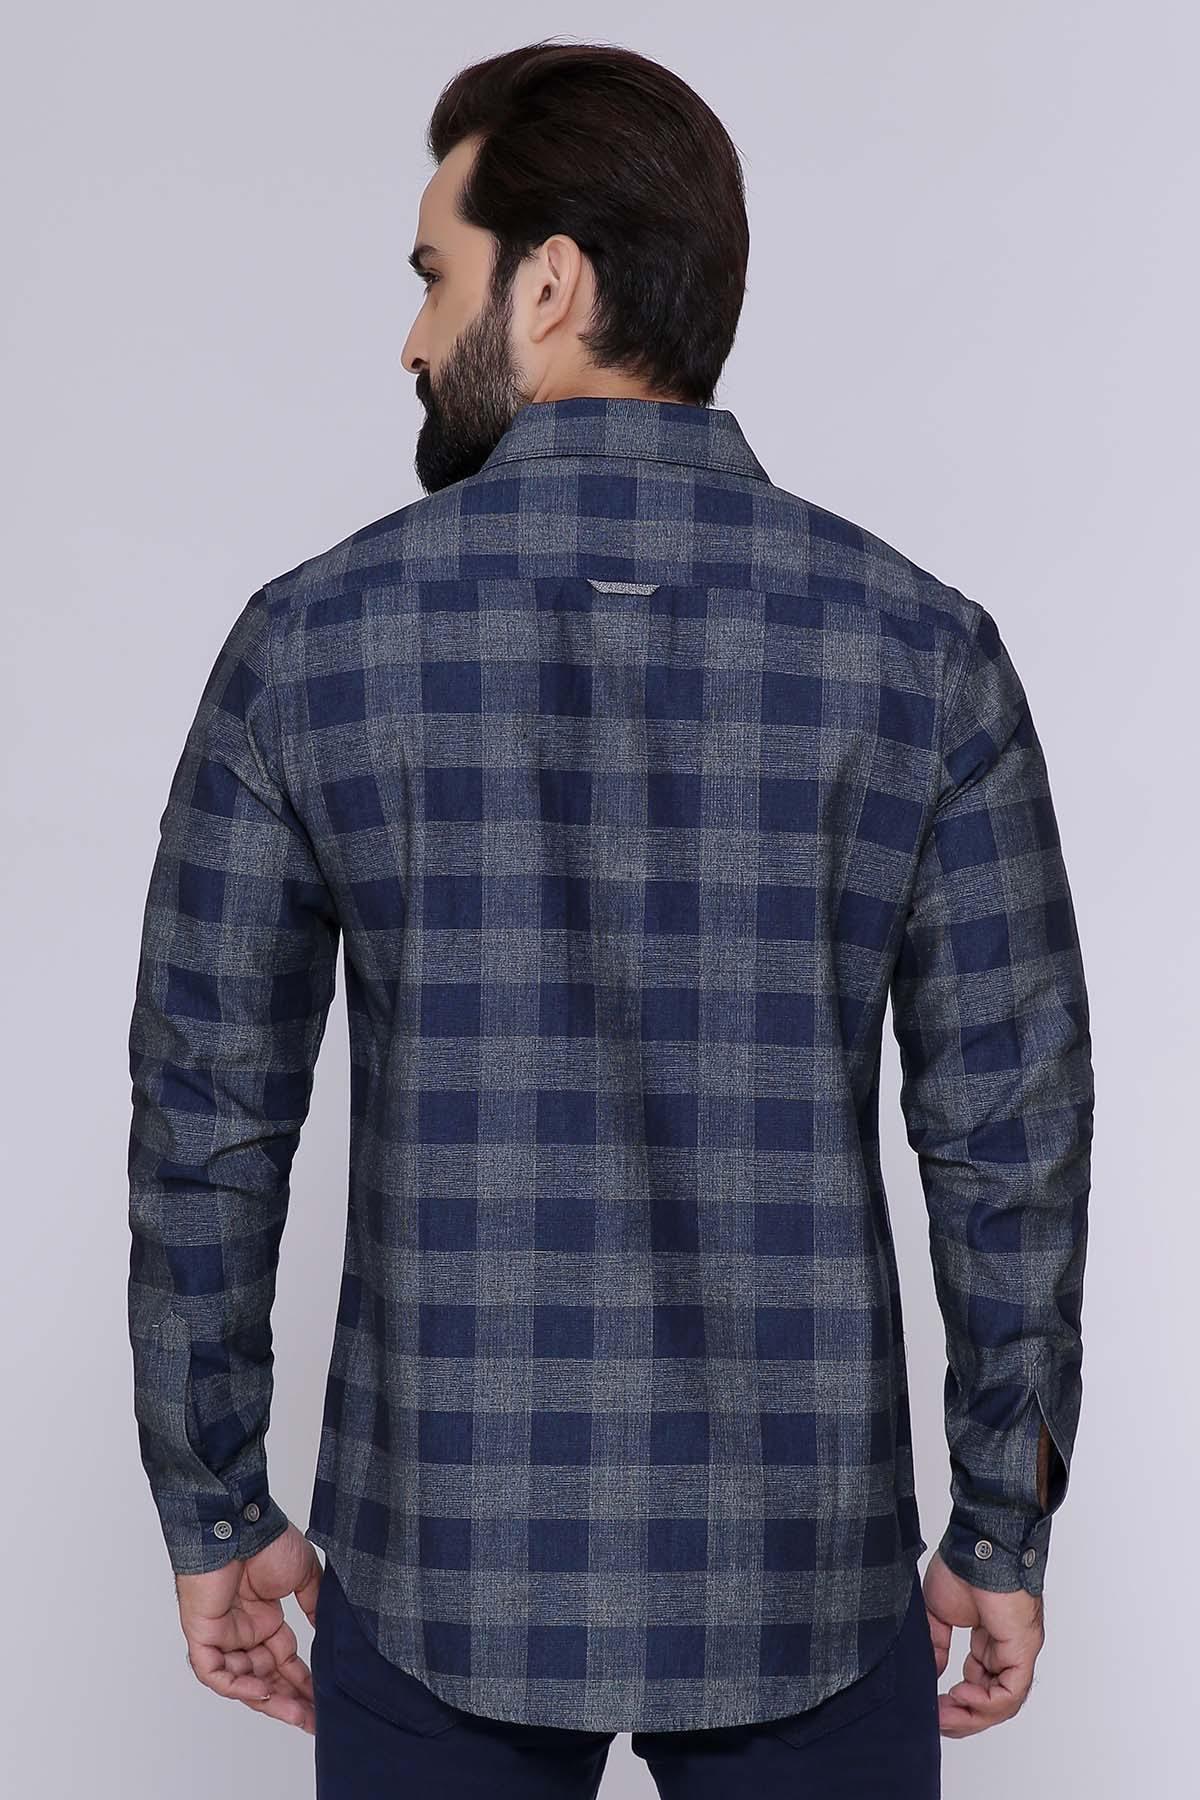 CASUAL SHIRT FULL SLEEVE SLIM FIT BLUE GREY at Charcoal Clothing